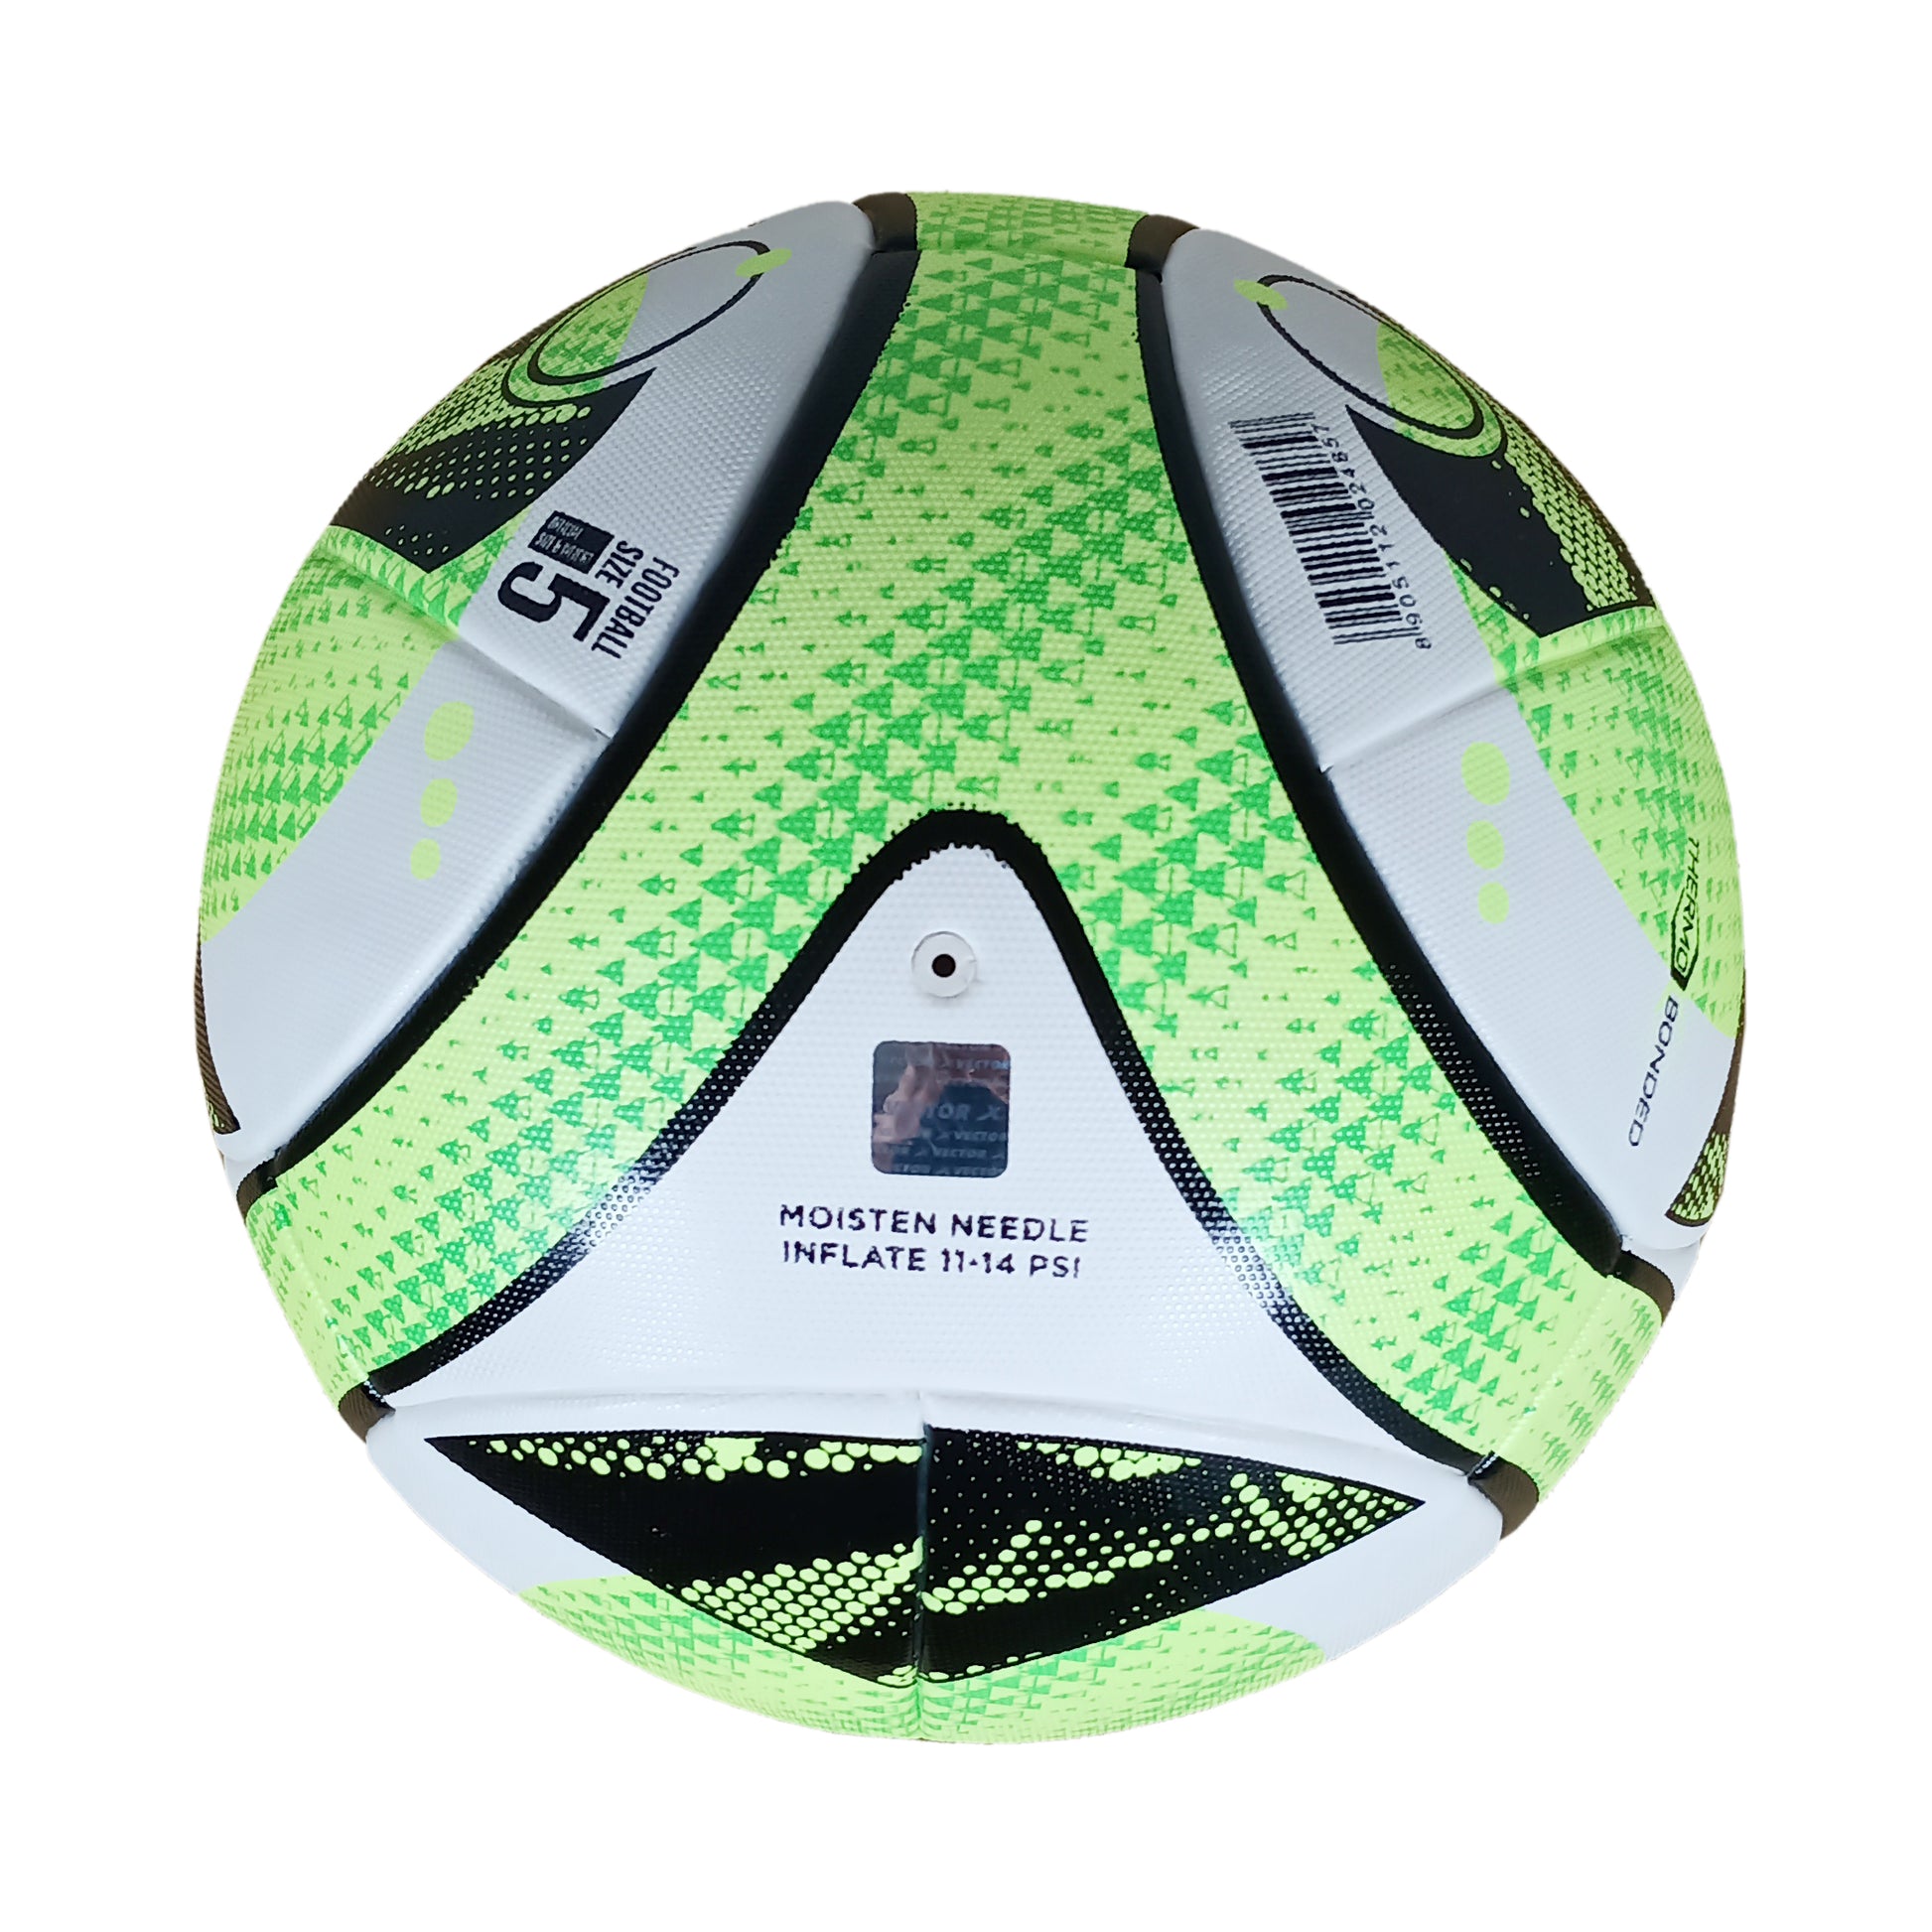 Vector X X-Force Thermo Bonded Football, Size 5 - Best Price online Prokicksports.com